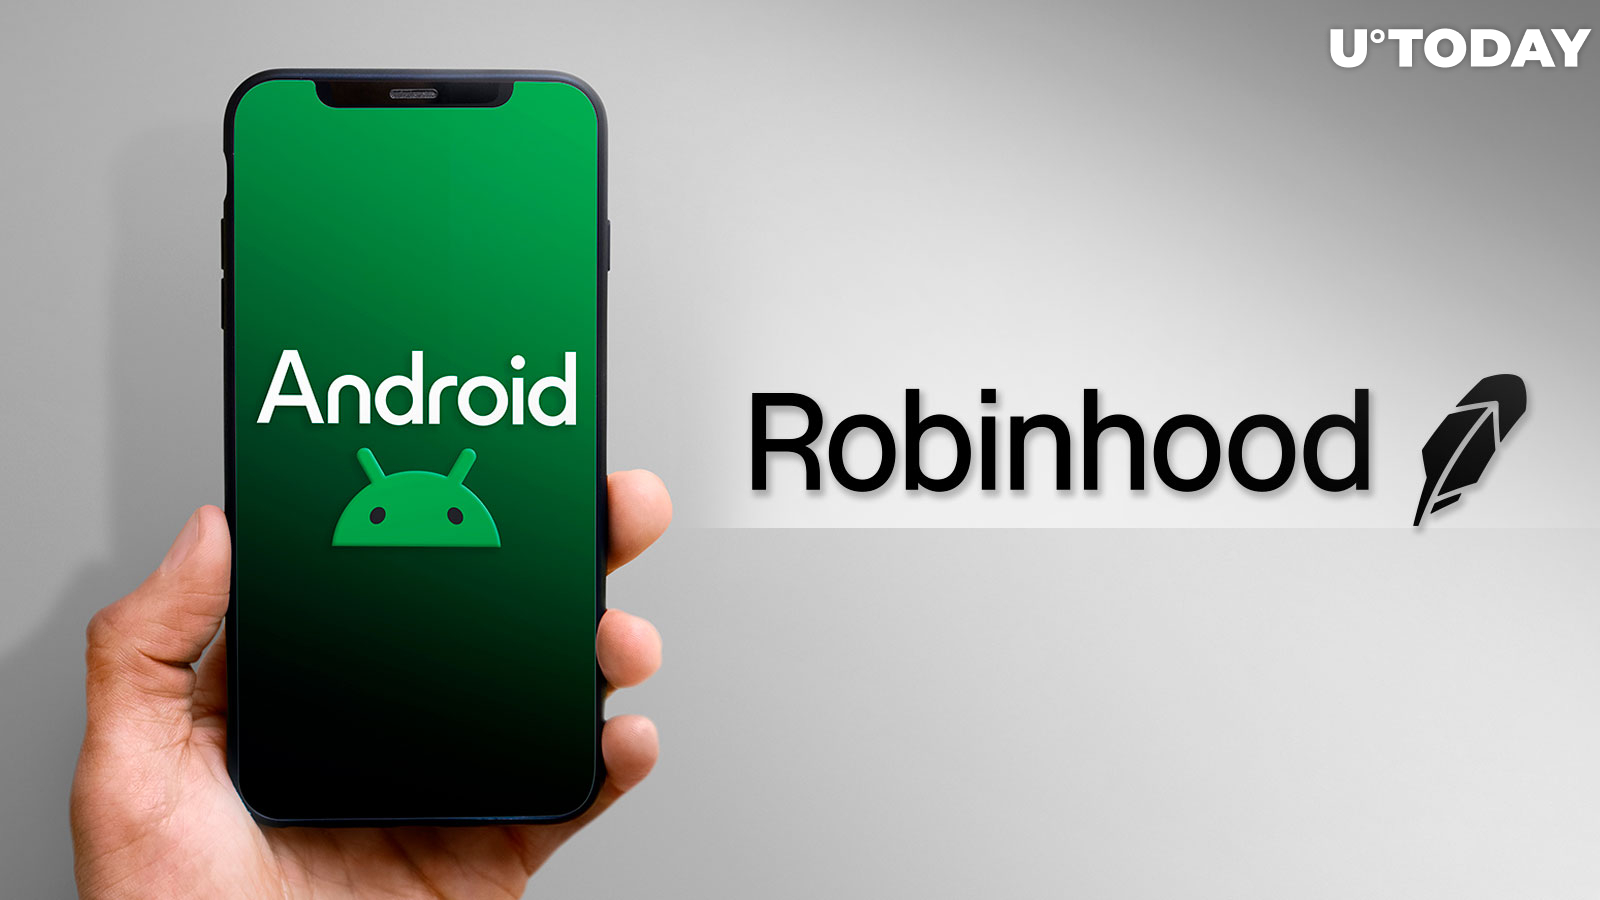 Android Users Can Now Store DOGE, SHIB, ETH, MATIC and Other Coins on Robinhood Worldwide